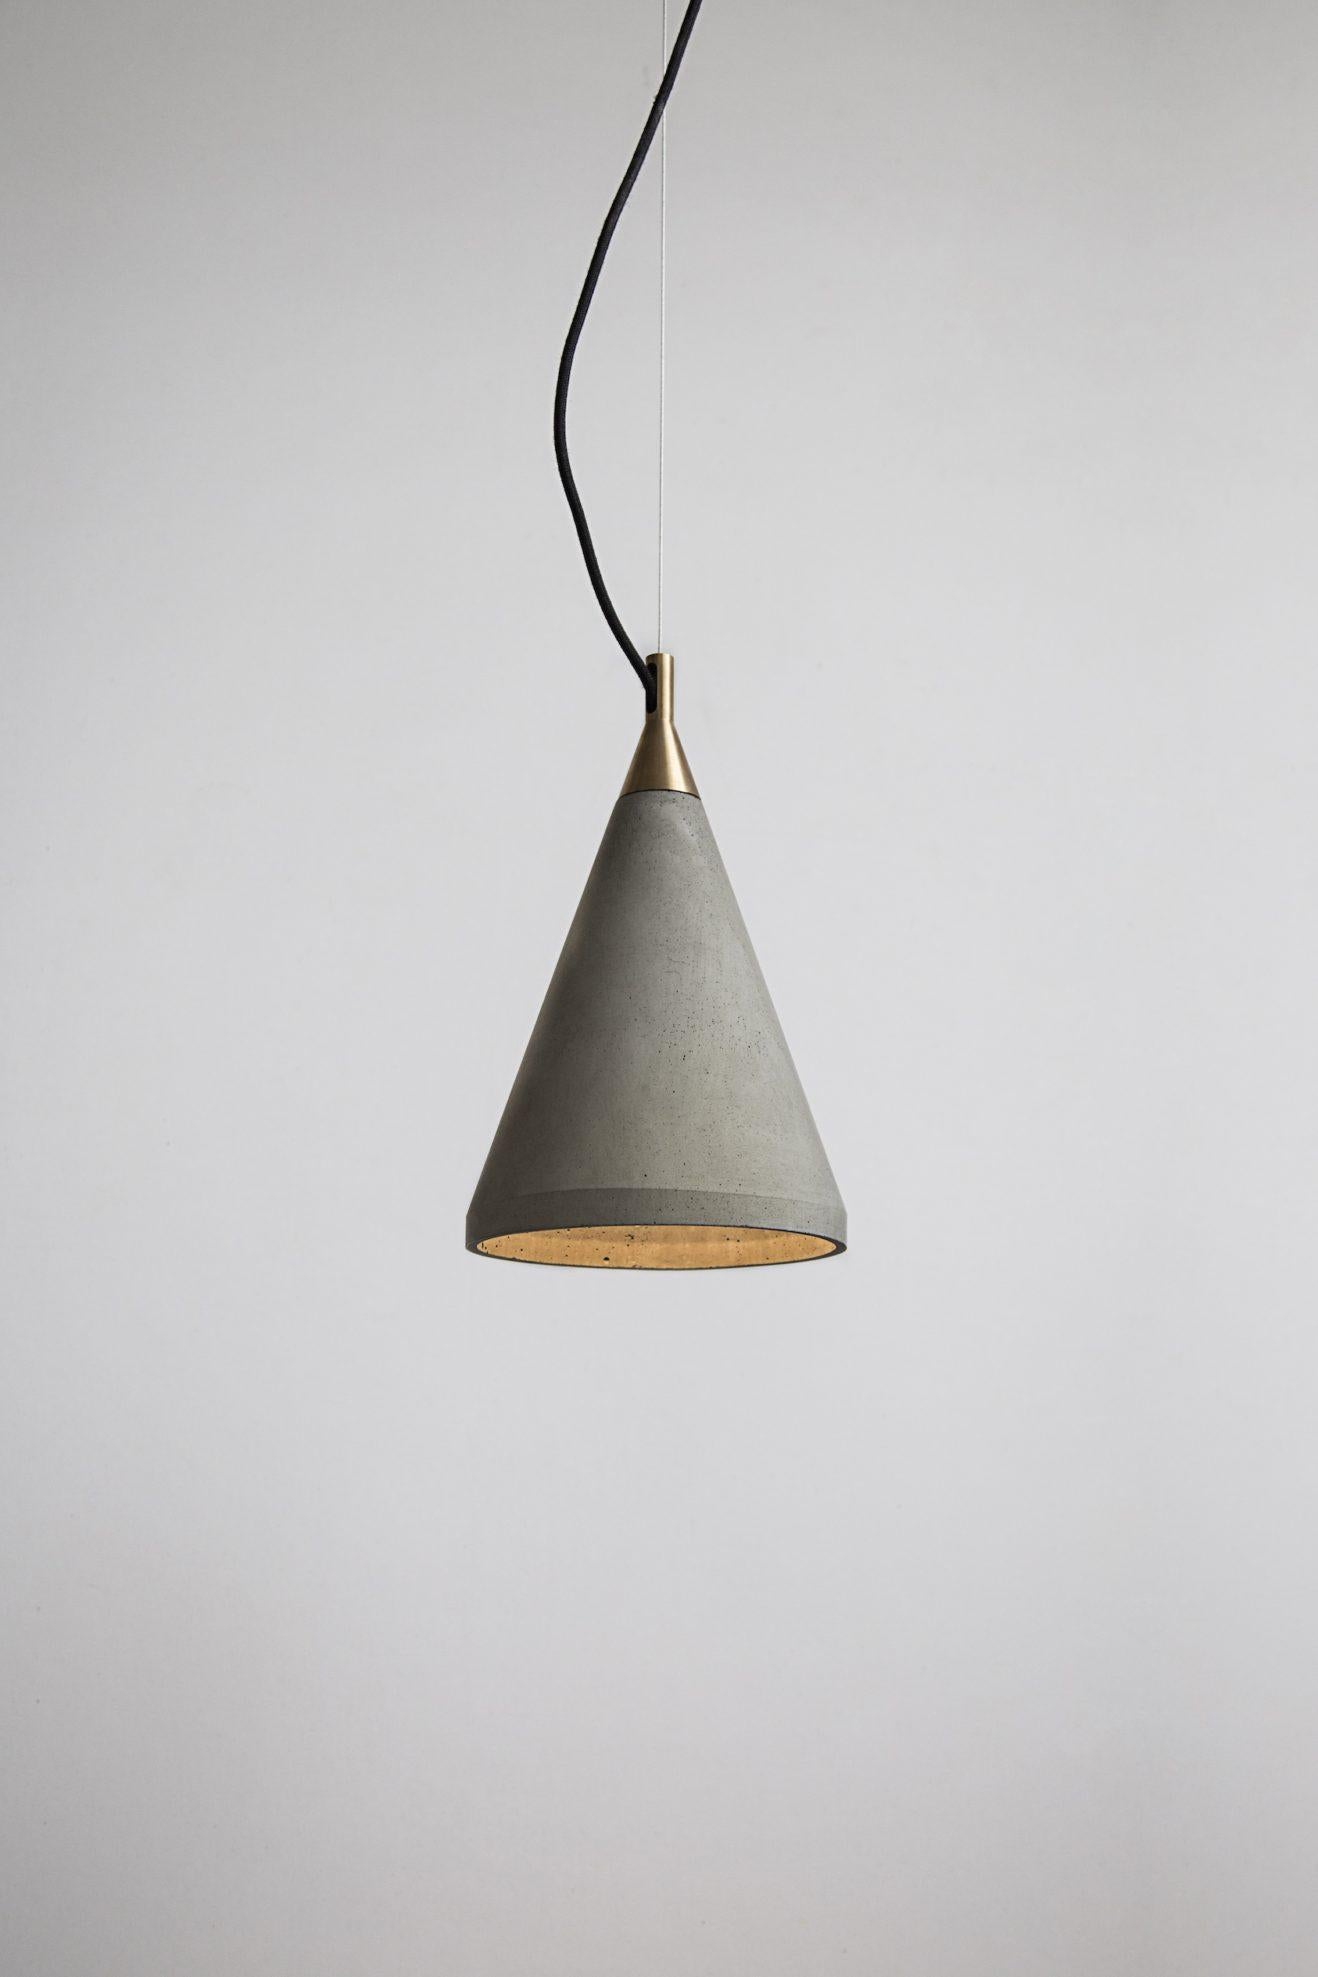 Ren 1
Concrete ceiling lamp designed by Cantonese studio Bentu Design

31.7 cm High; 20.2 cm Diameter
Concrete
Black wire 2m adjustable. 
Bulb: E27 LED 7W 100-240V 80Ra 700LM 3400K

These pendant lamps are available in 3 different dimensions with